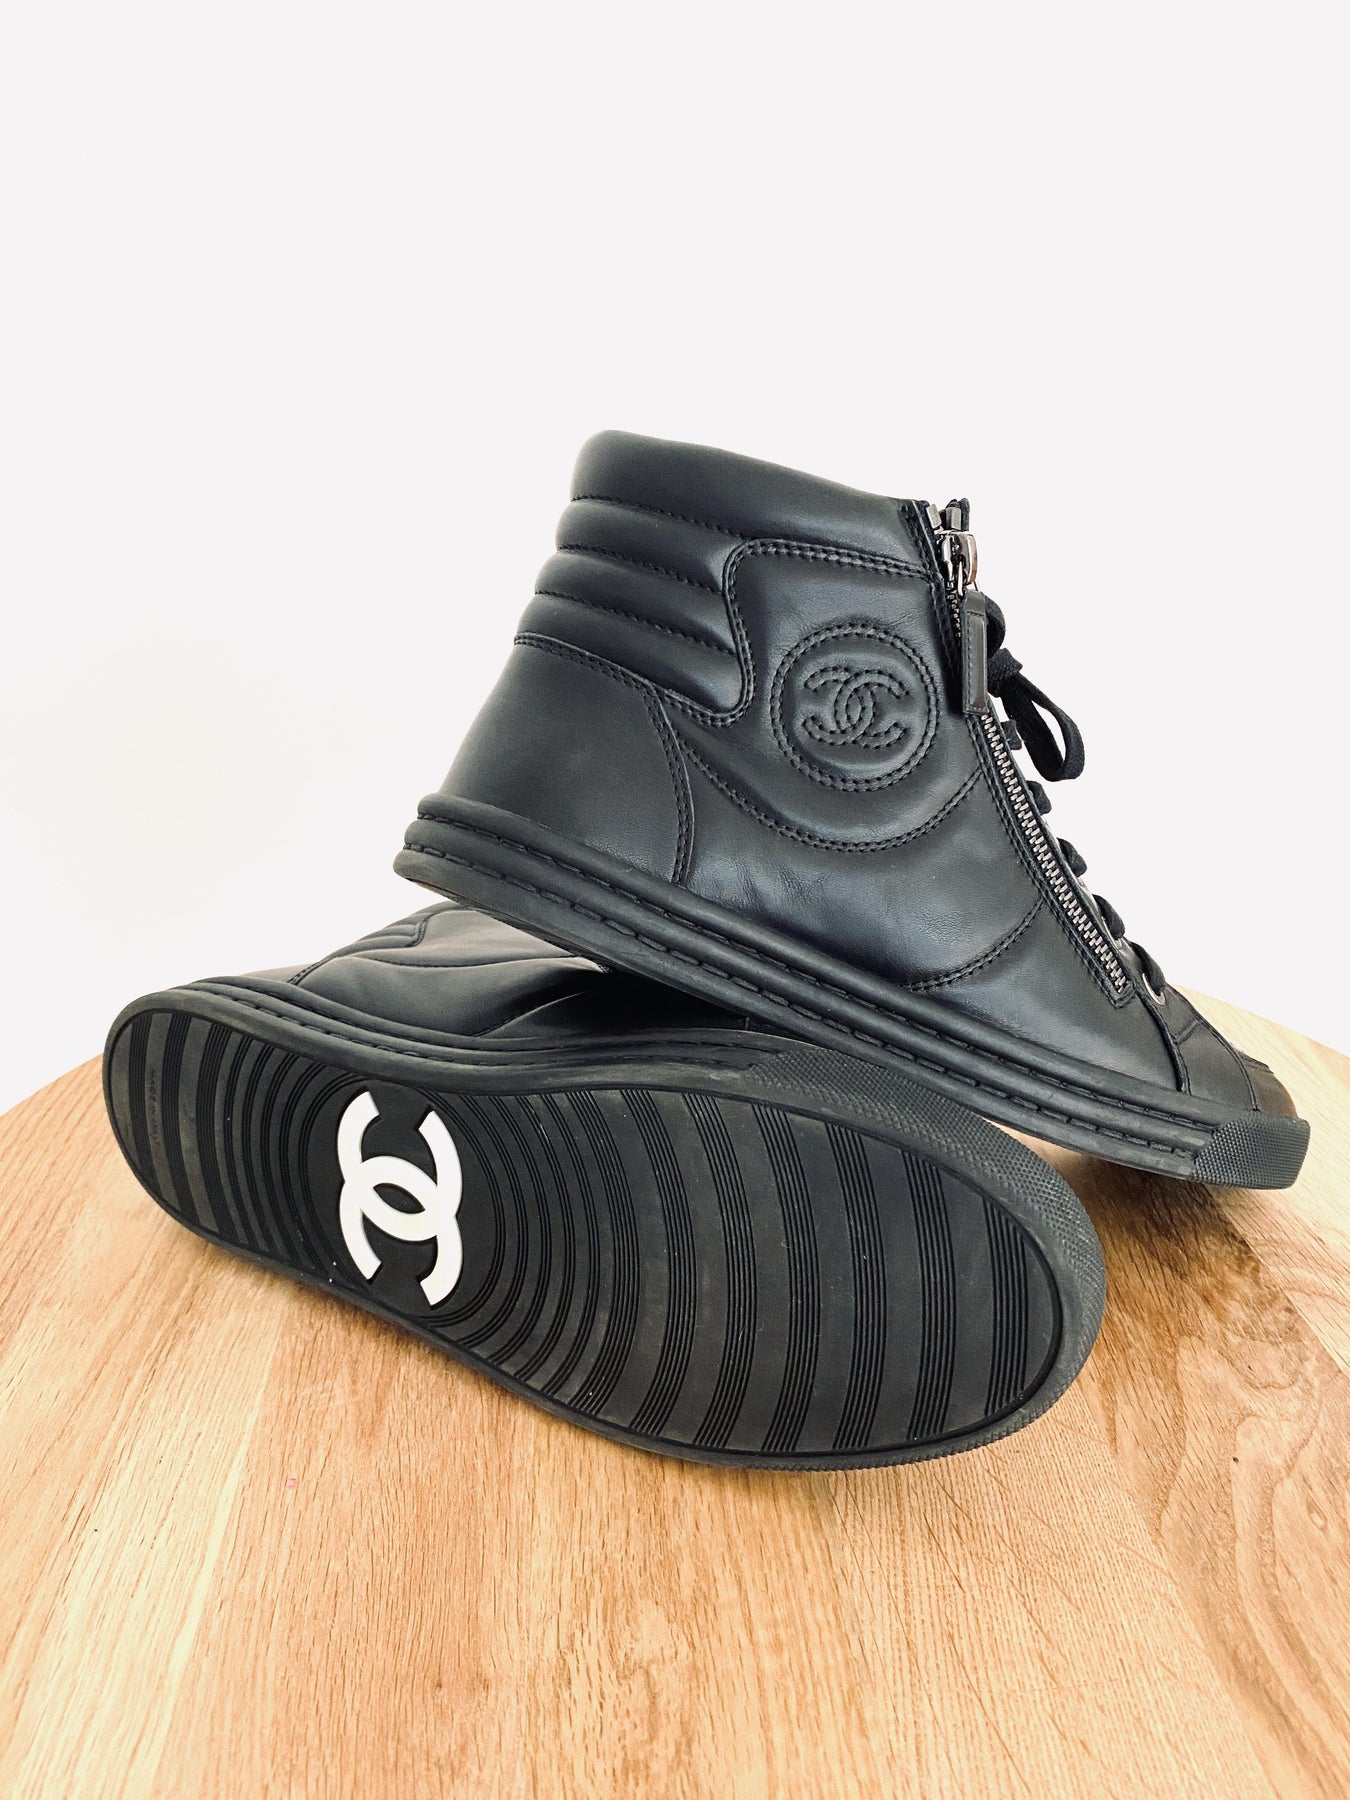 Chanel Black Leather CC Double Zip Accent High Top Sneakers Size 39 Chanel